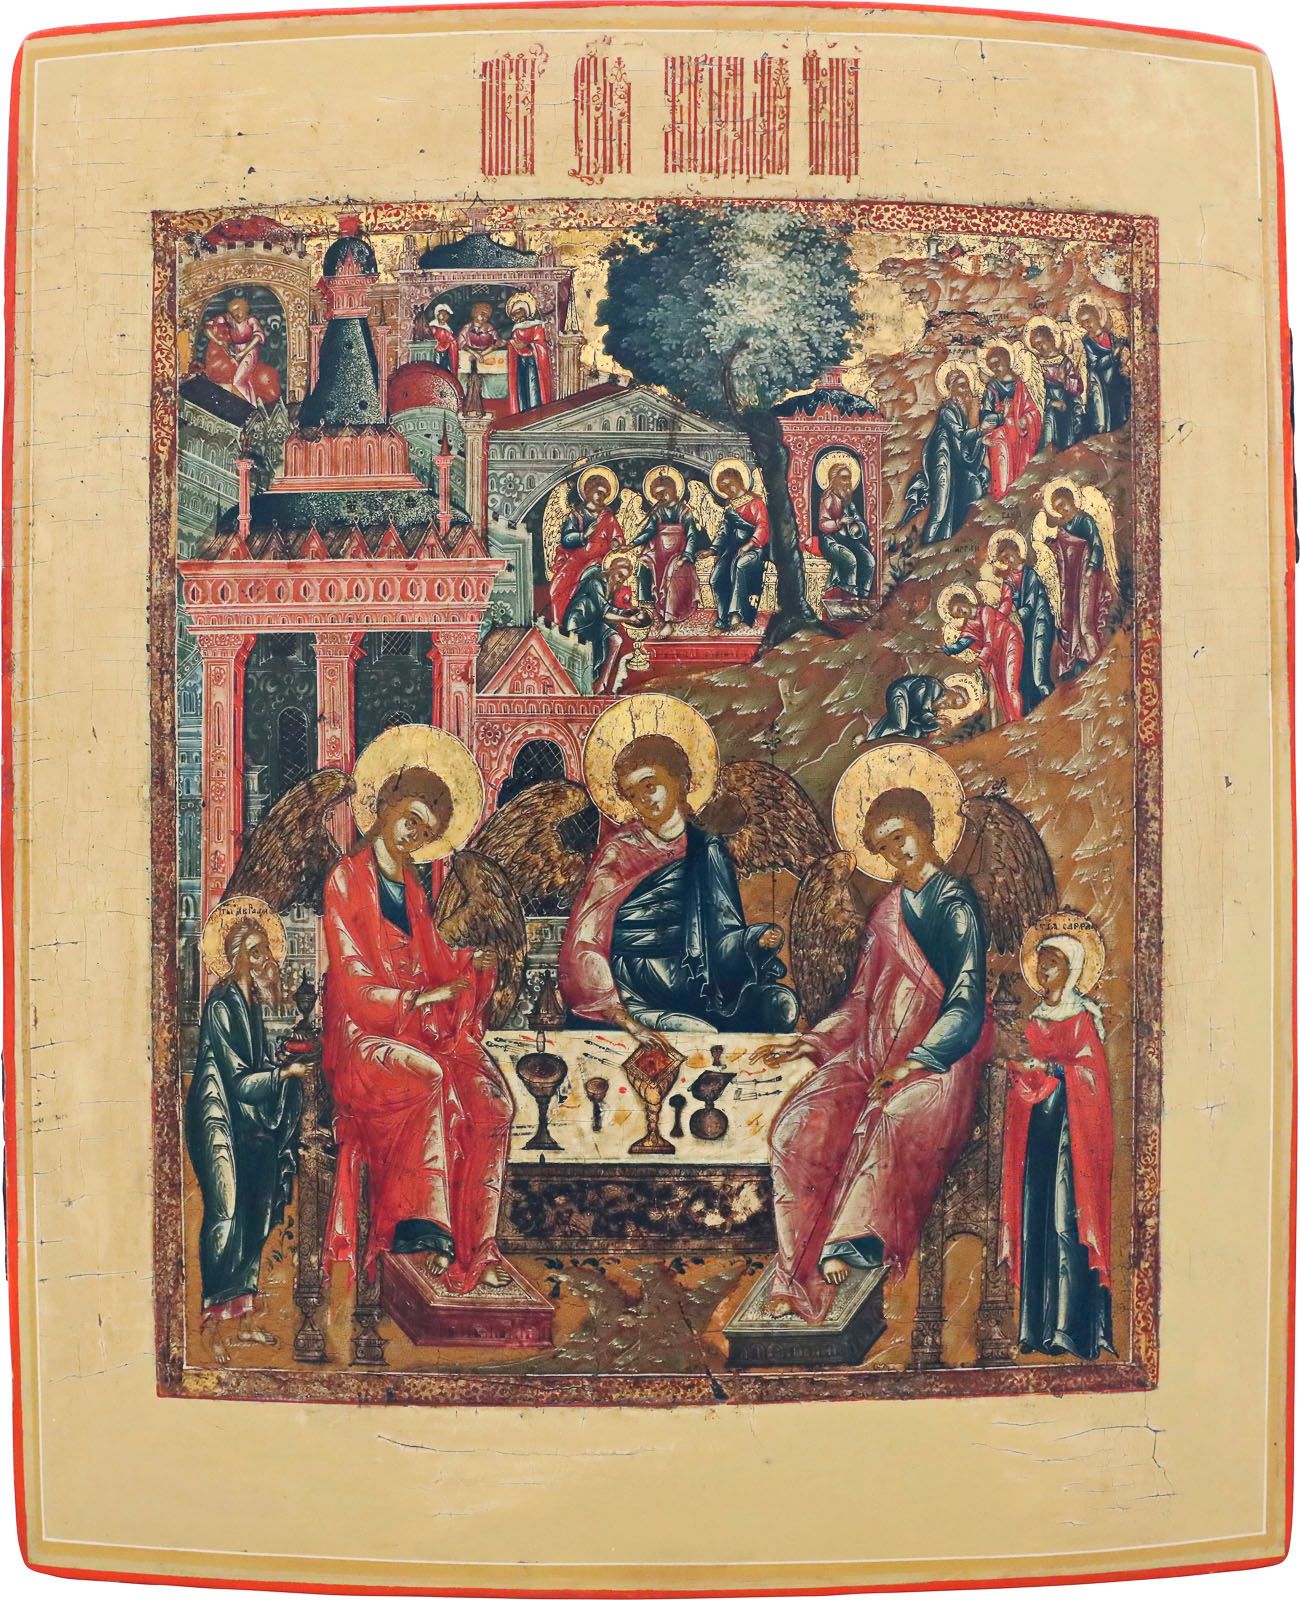 A VERY FINE ICON SHOWING THE OLD TESTAMENT TRINITY * A VERY FINE ICON SHOWING TH&hellip;